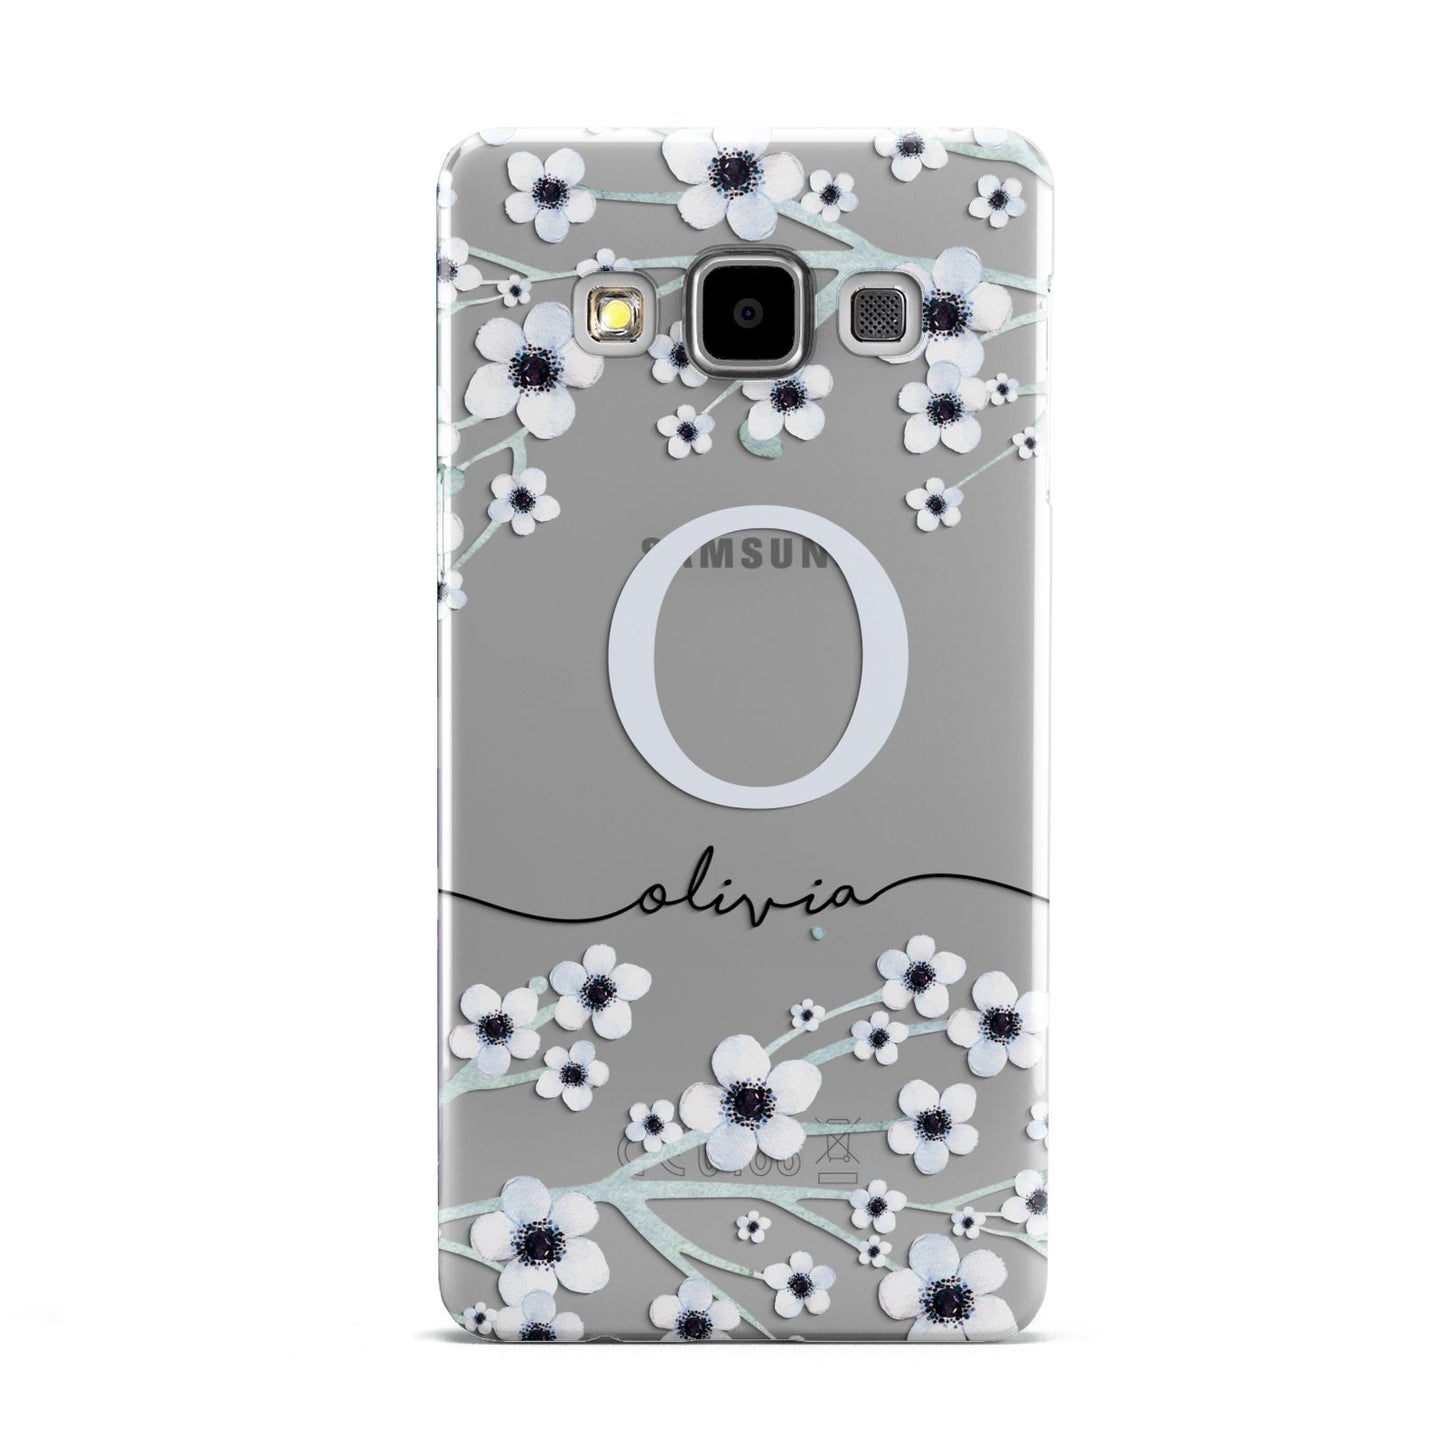 Personalised White Flower Samsung Galaxy A5 Case